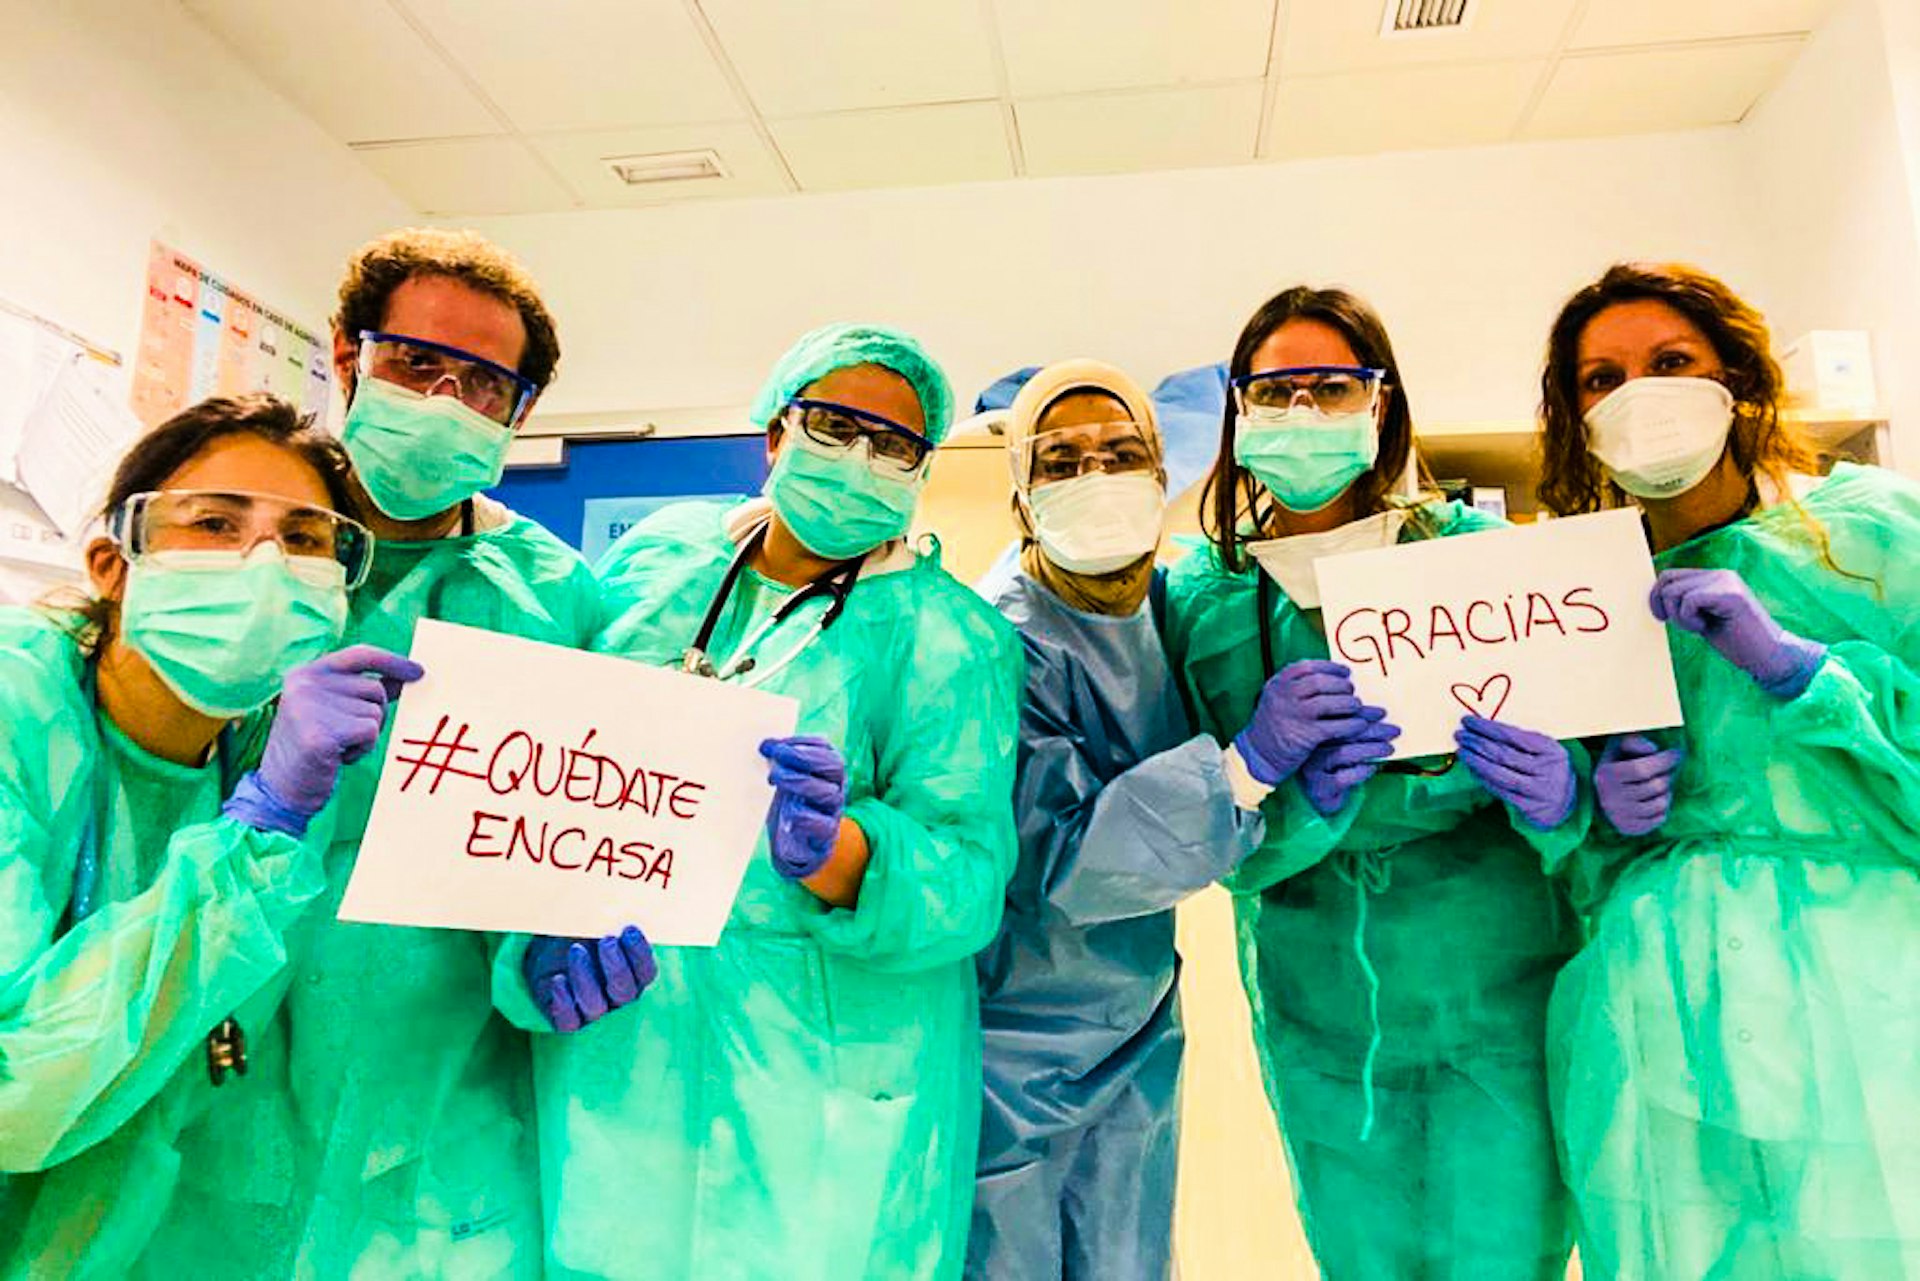 A group of doctors in protective gear hold up a sign saying 'Gracias', meaning Thank You in Spanish